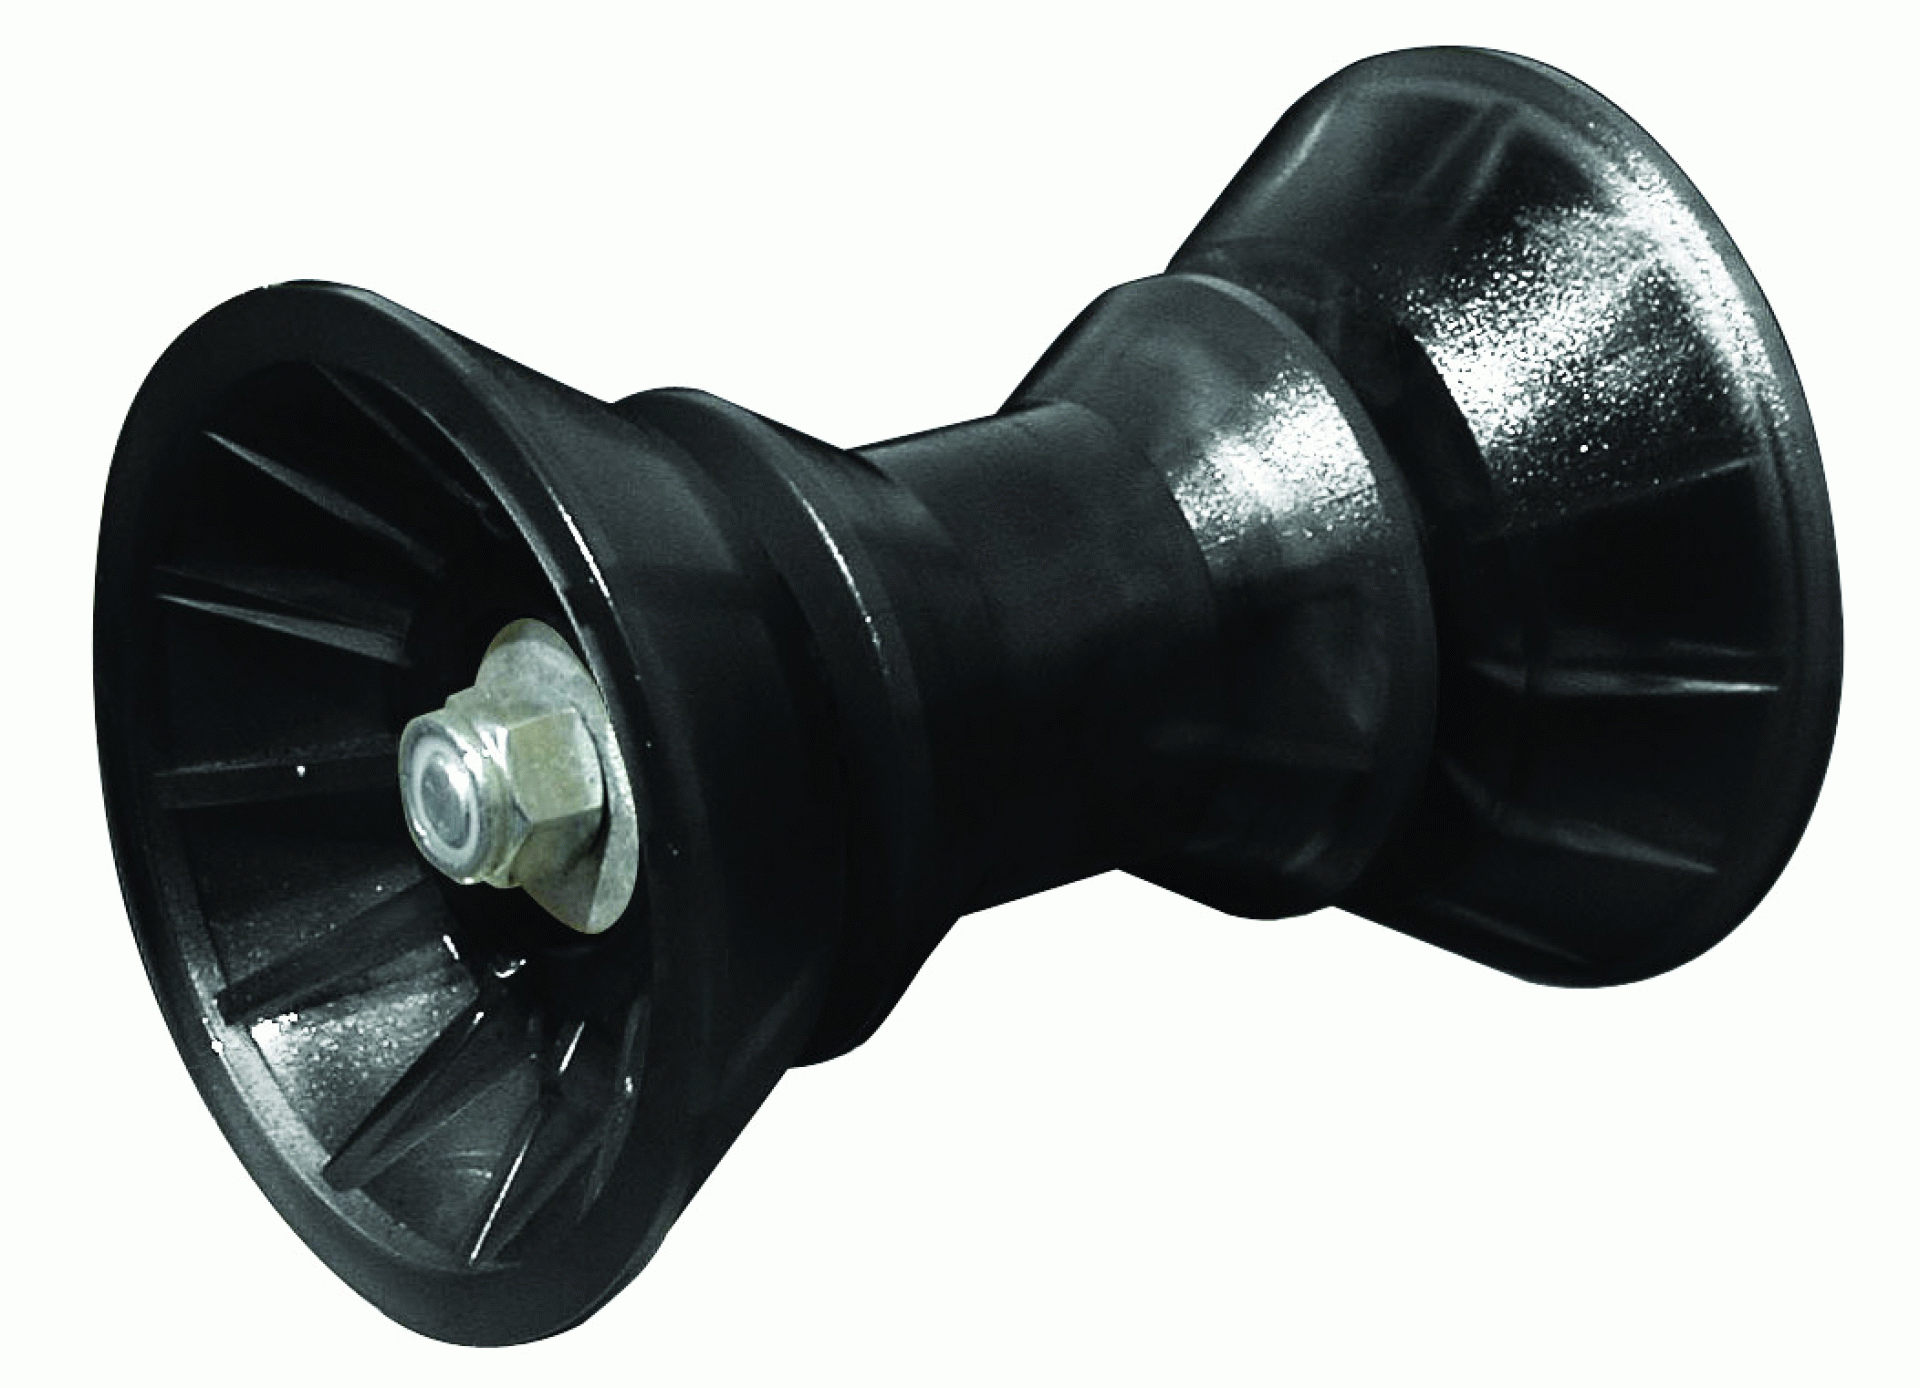 TIE DOWN ENGINEERING INC | 86405 | ROLLER ASSEMBLY W/ END BELLS - 3" - BLACK